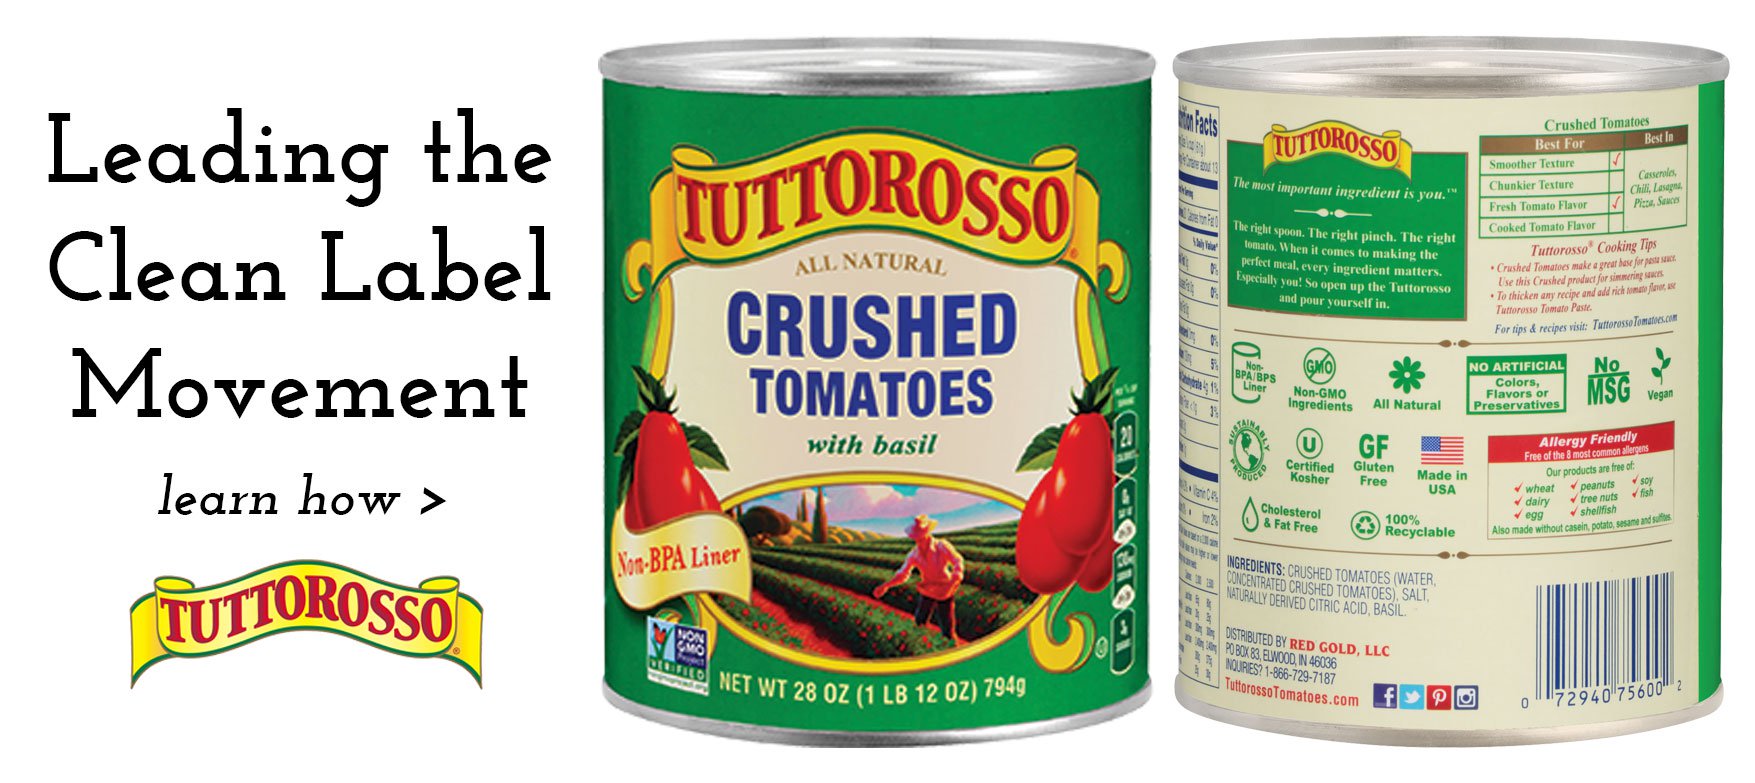 Tuttorosso Tomatoes Clean Label Movement and Product Transparency